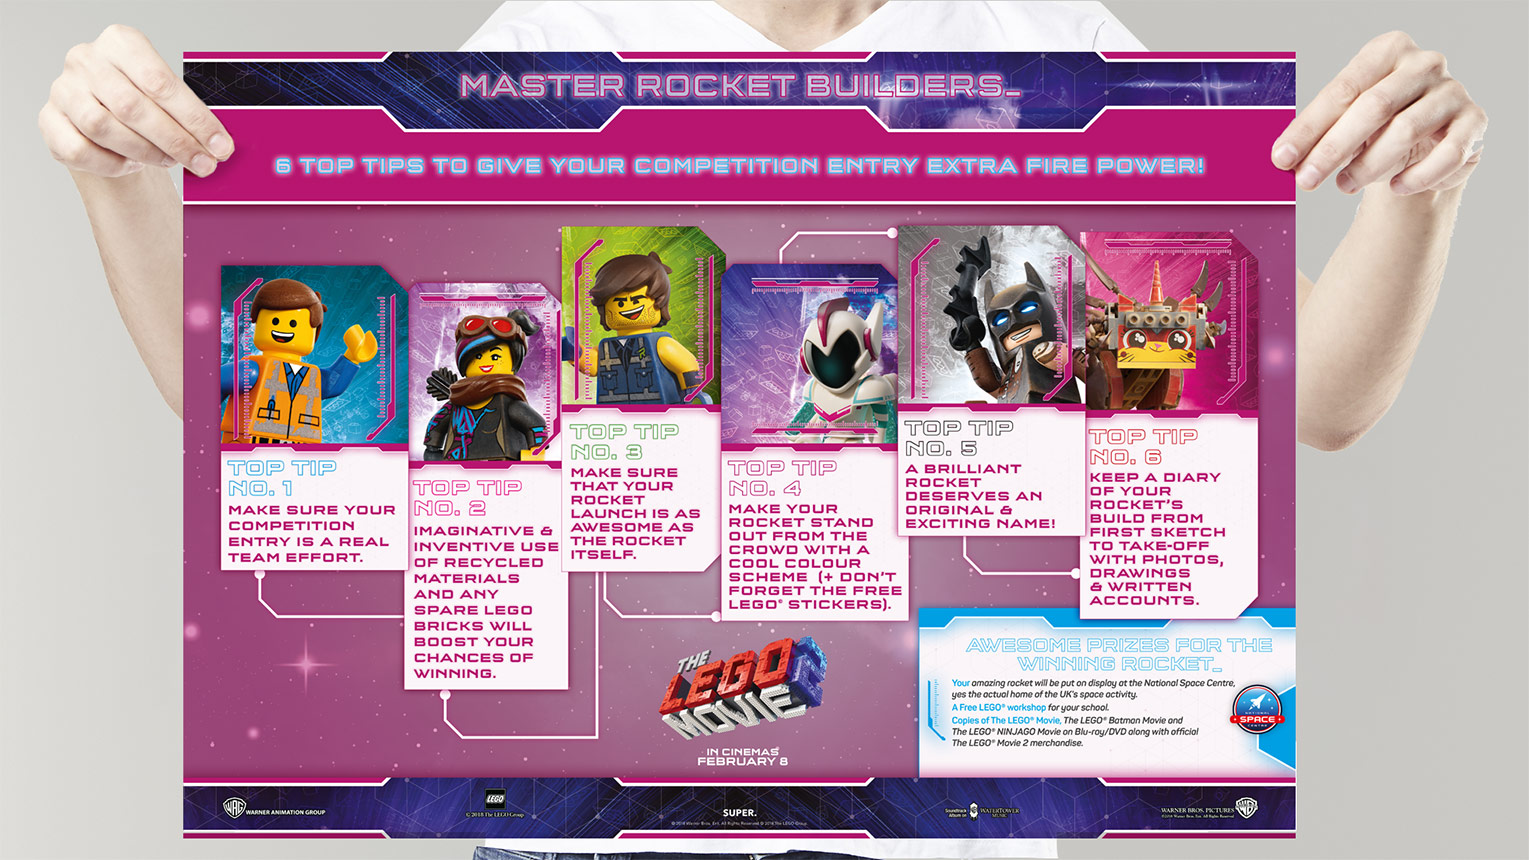 Lego Master Rocket Builders Competition for Children with SUPER